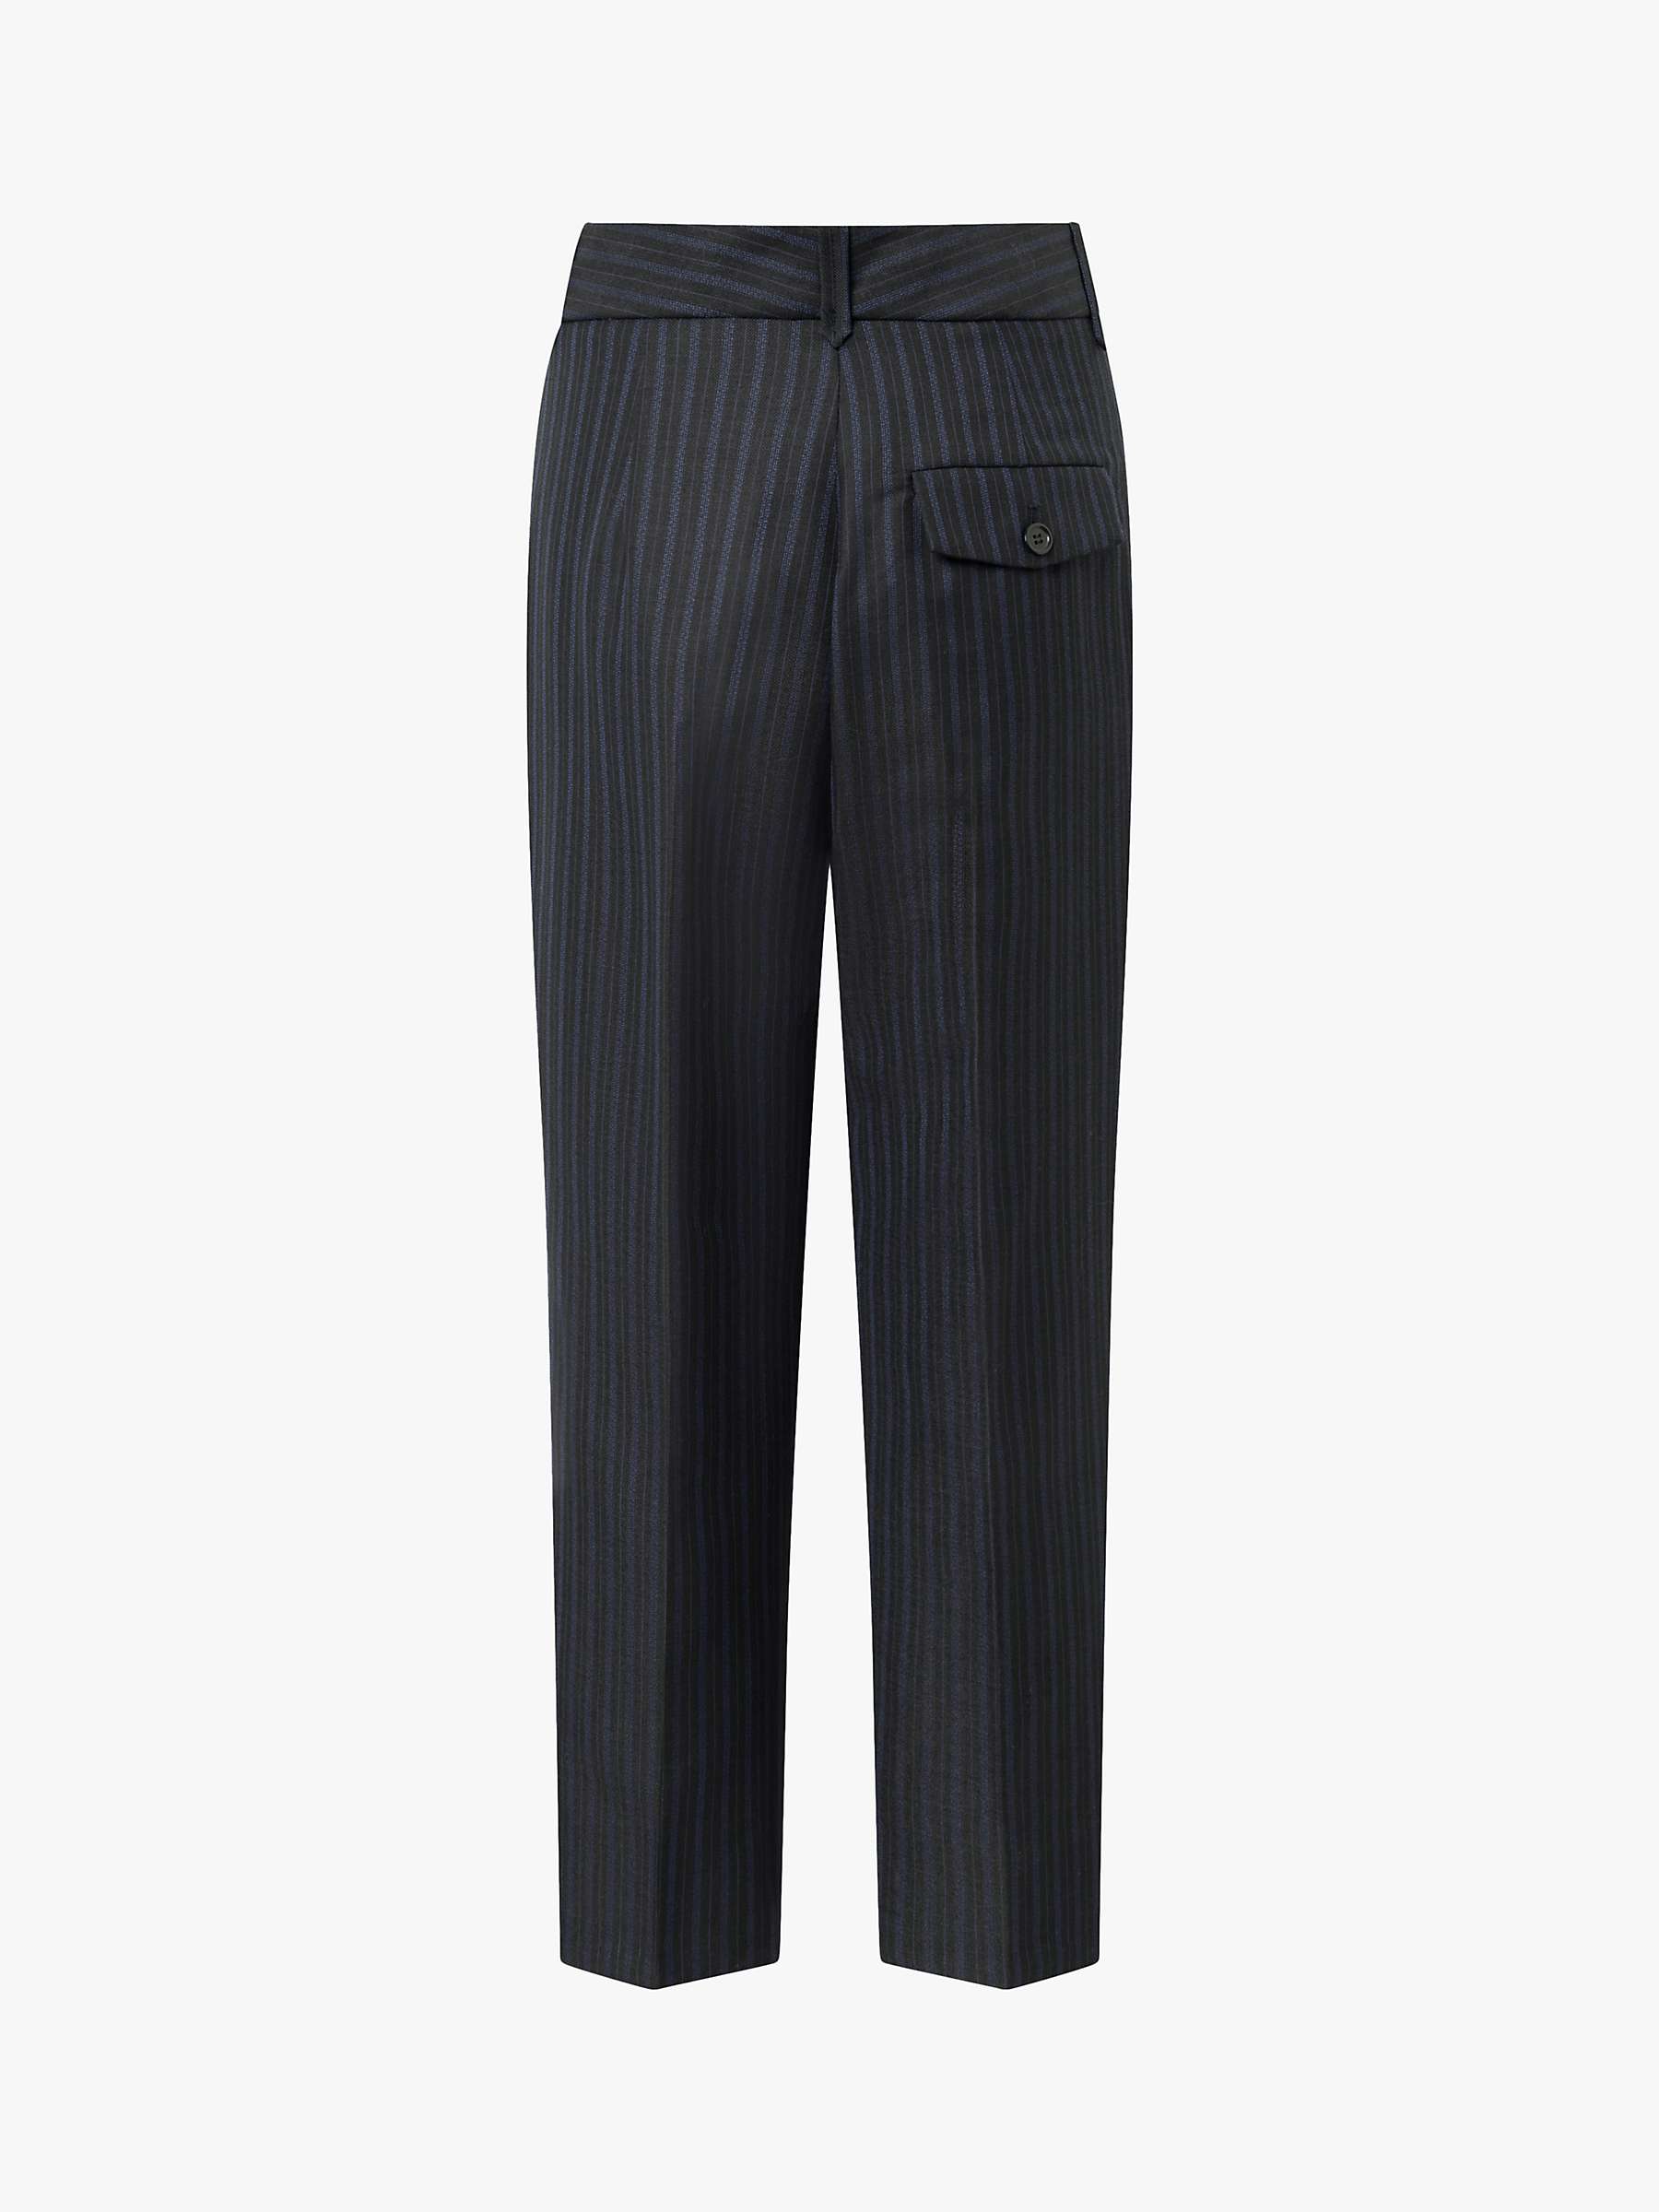 Buy Lovechild 1979 Coppola Striped Cropped Wool Trousers, Black/Multi Online at johnlewis.com